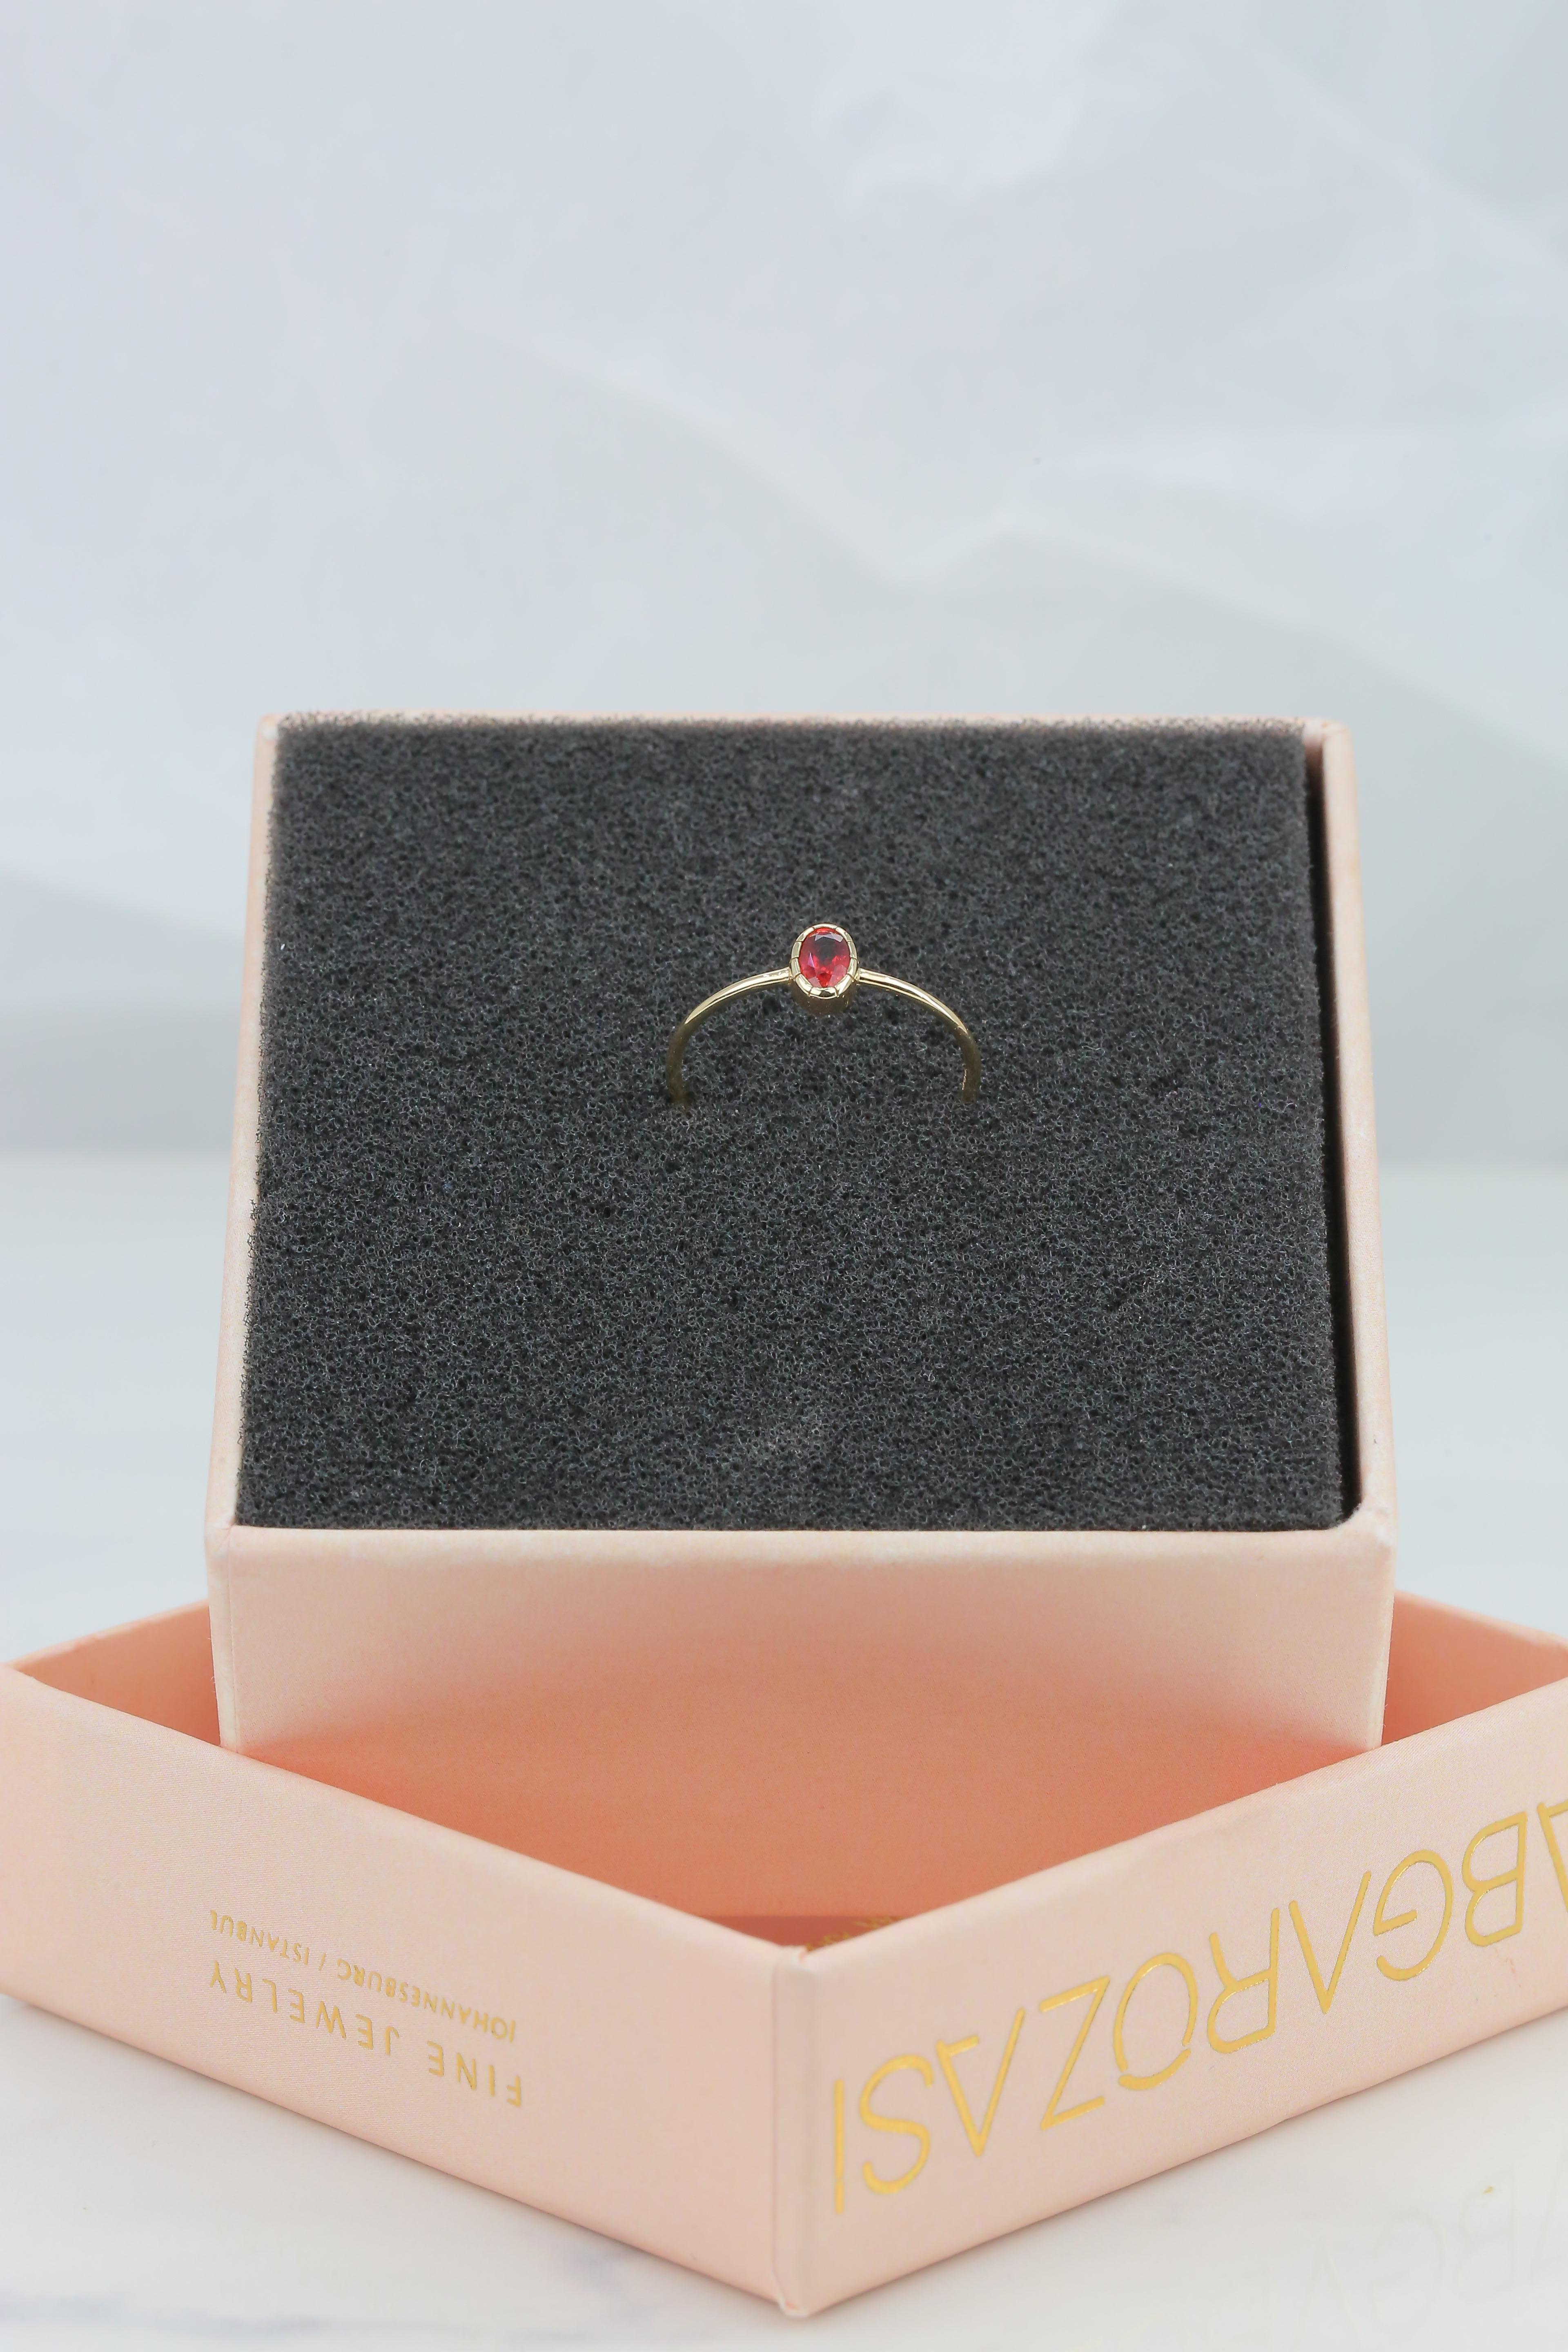 For Sale:  0.45 Ct Oval Cut Red Sapphire 14K Gold Birthstone Ring, Casual Ring 10